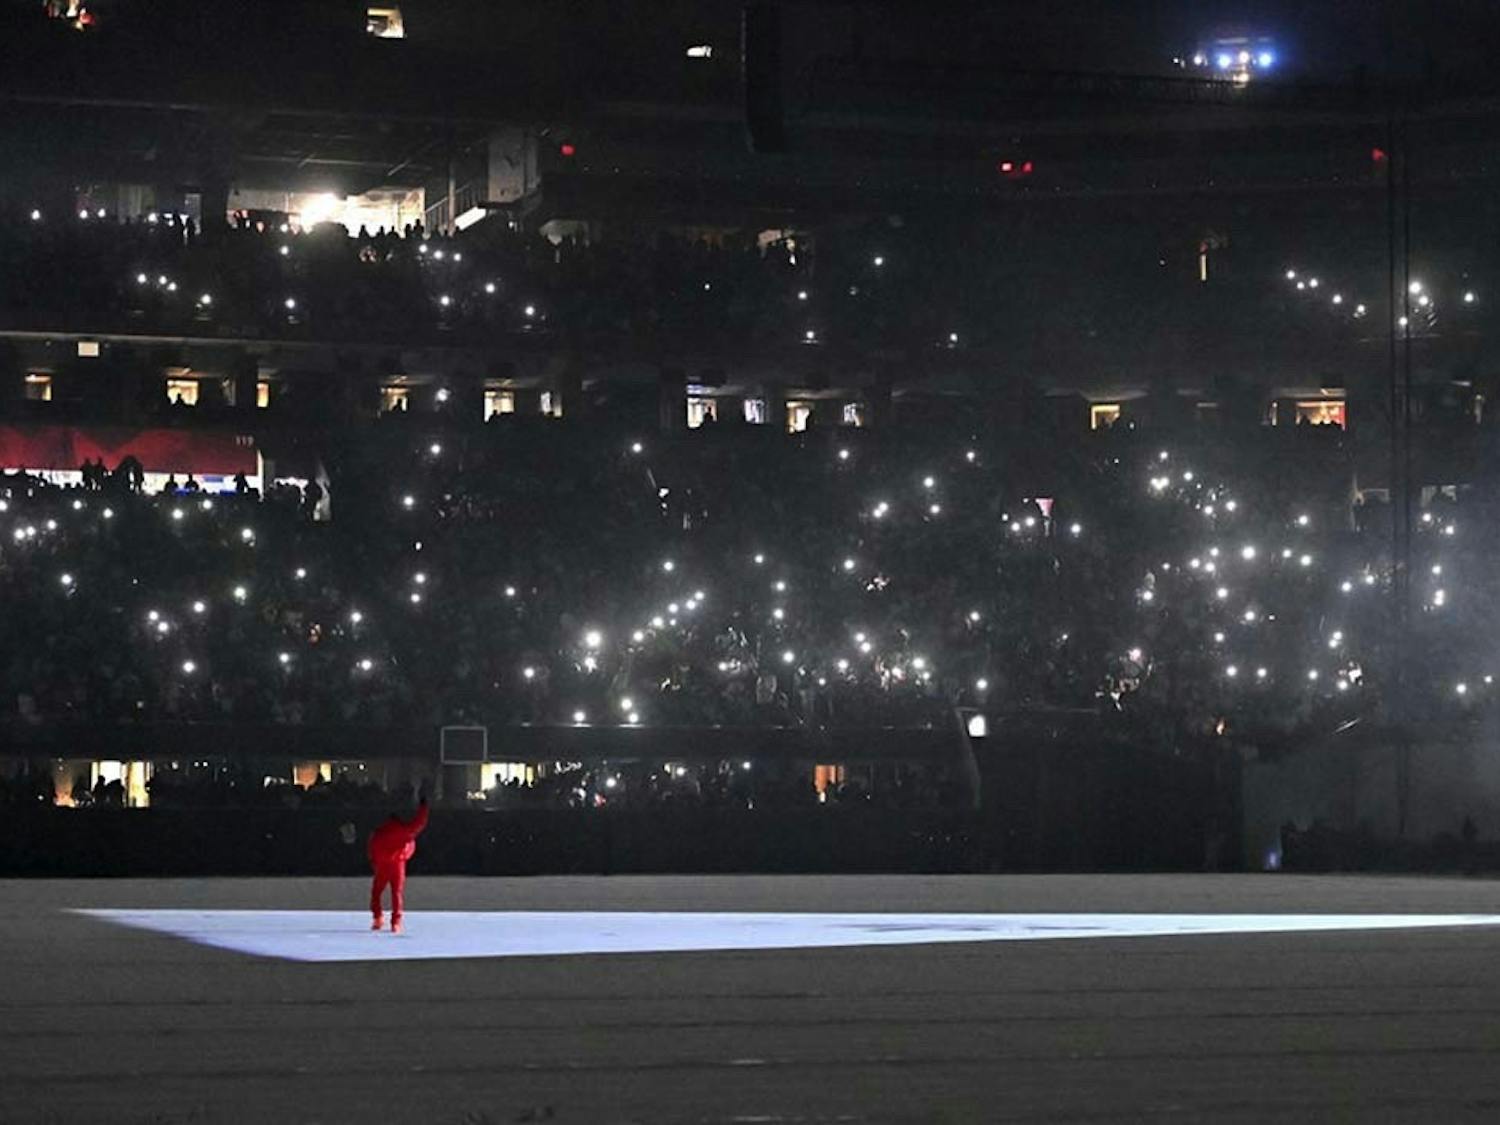 Kanye West performs his songs at the "DONDA by Kanye West" listening event at the first Donda listening party, in the Mercedes-Benz Stadium. West's most recent album was released through labels GOOD Music and Def Jam Recordings and is named after his mother.&nbsp;